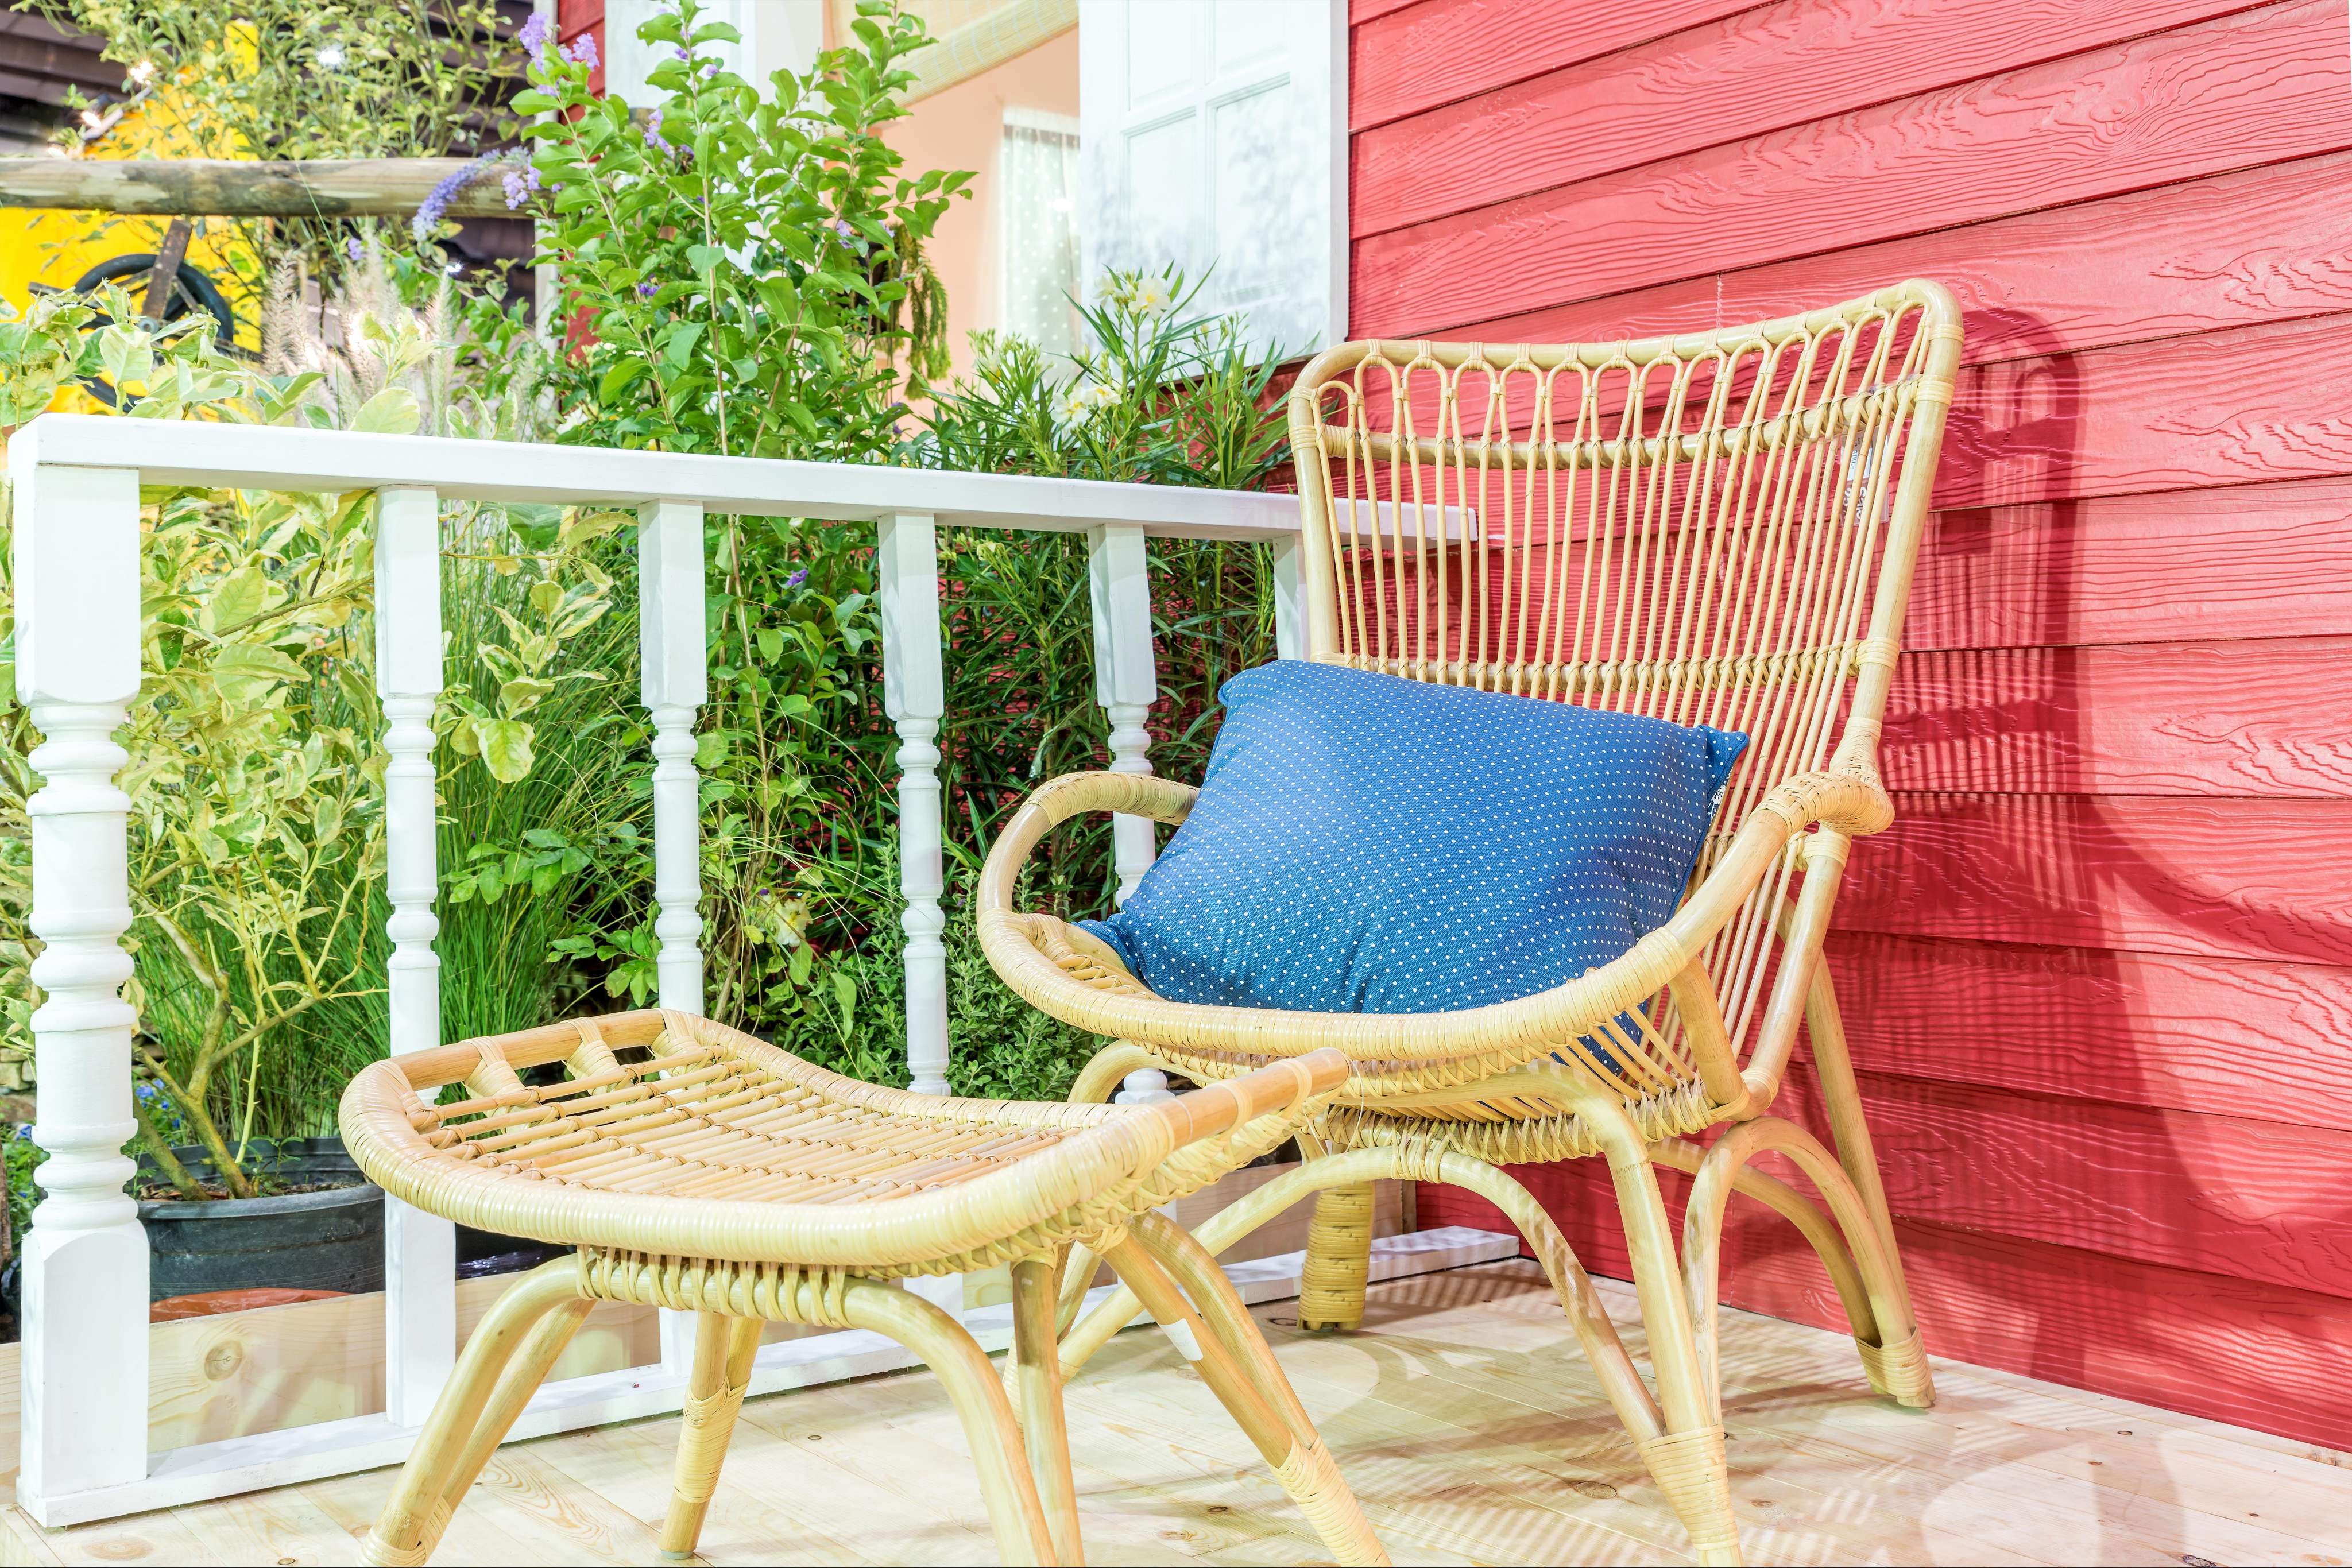 Simple Rustic Balcony Design with Cane Furniture